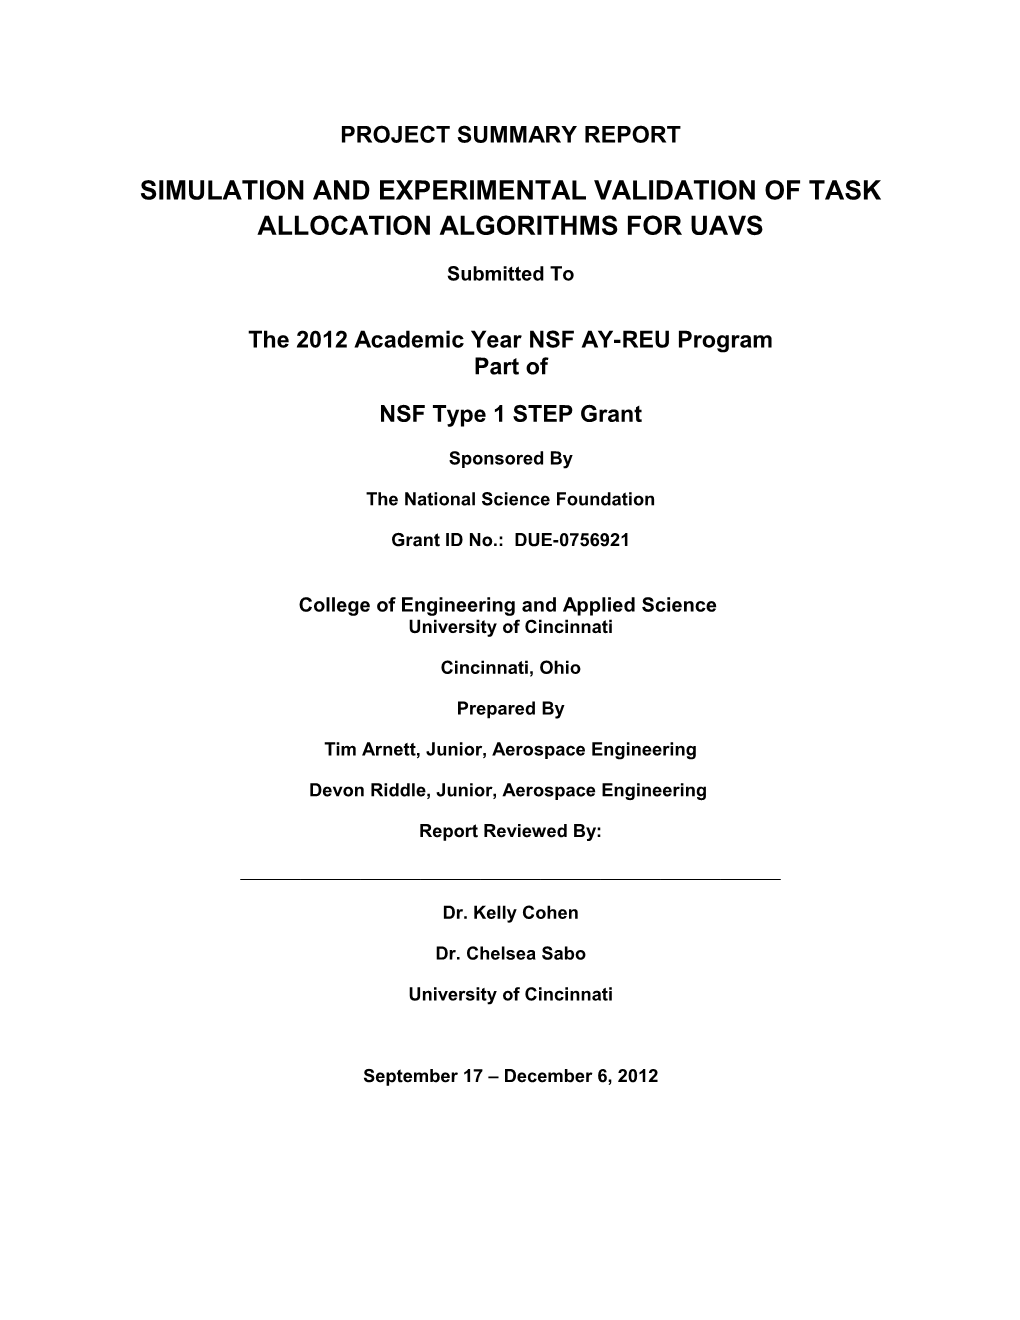 Simulation and Experimental Validation of Task Allocation Algorithms for Uavs